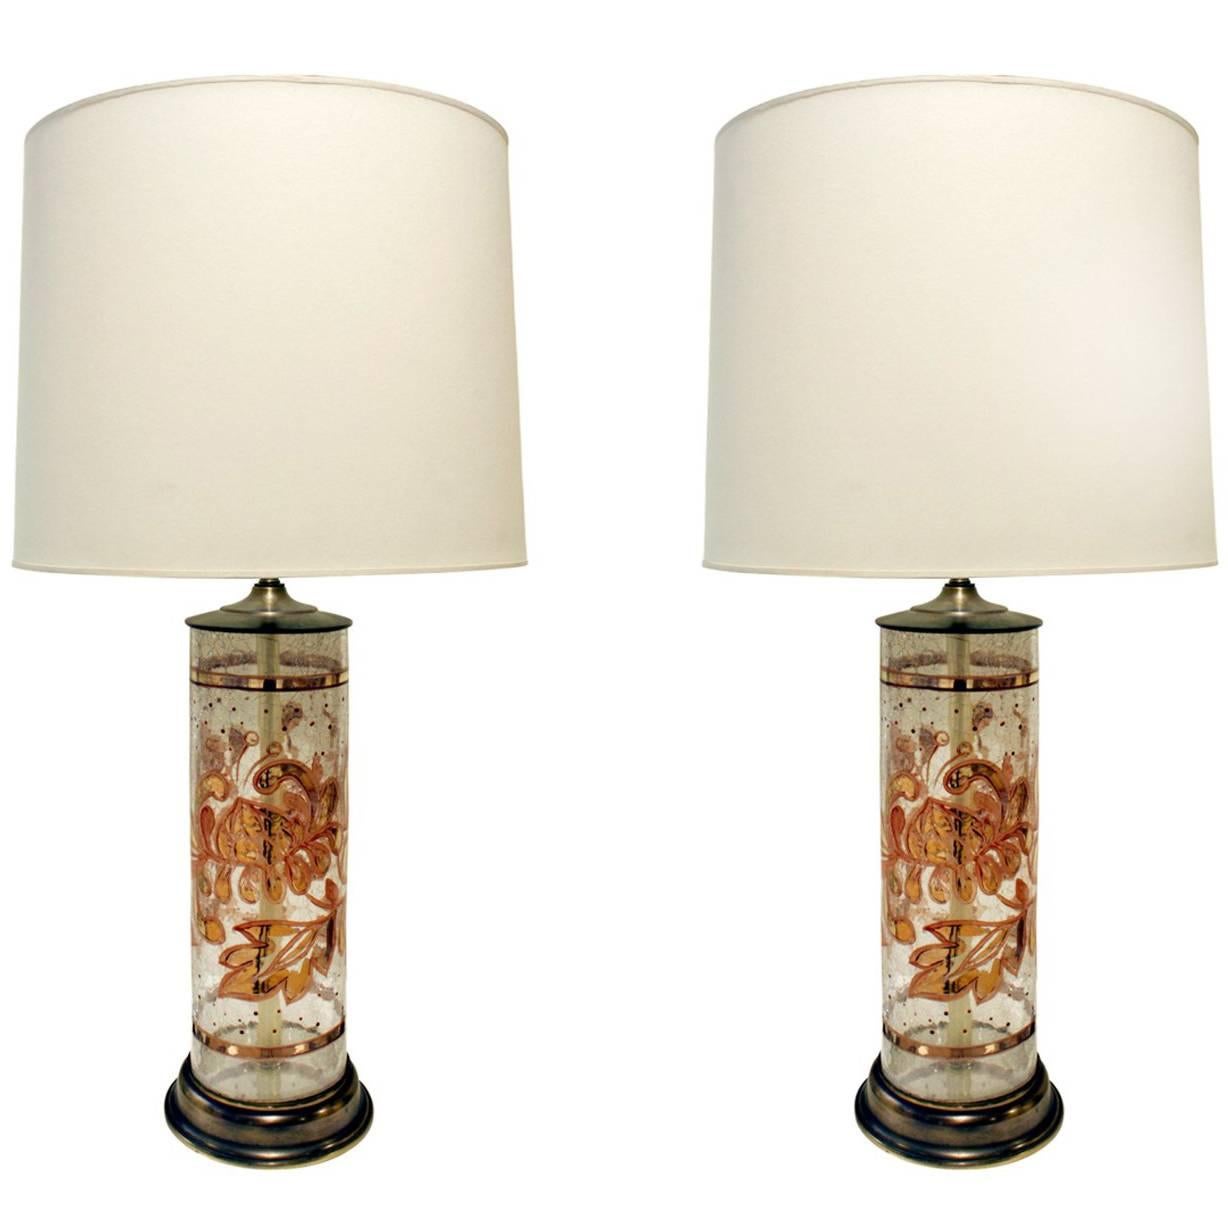 Pair of Beautiful Hand-Painted Glass Table Lamps, 1940s